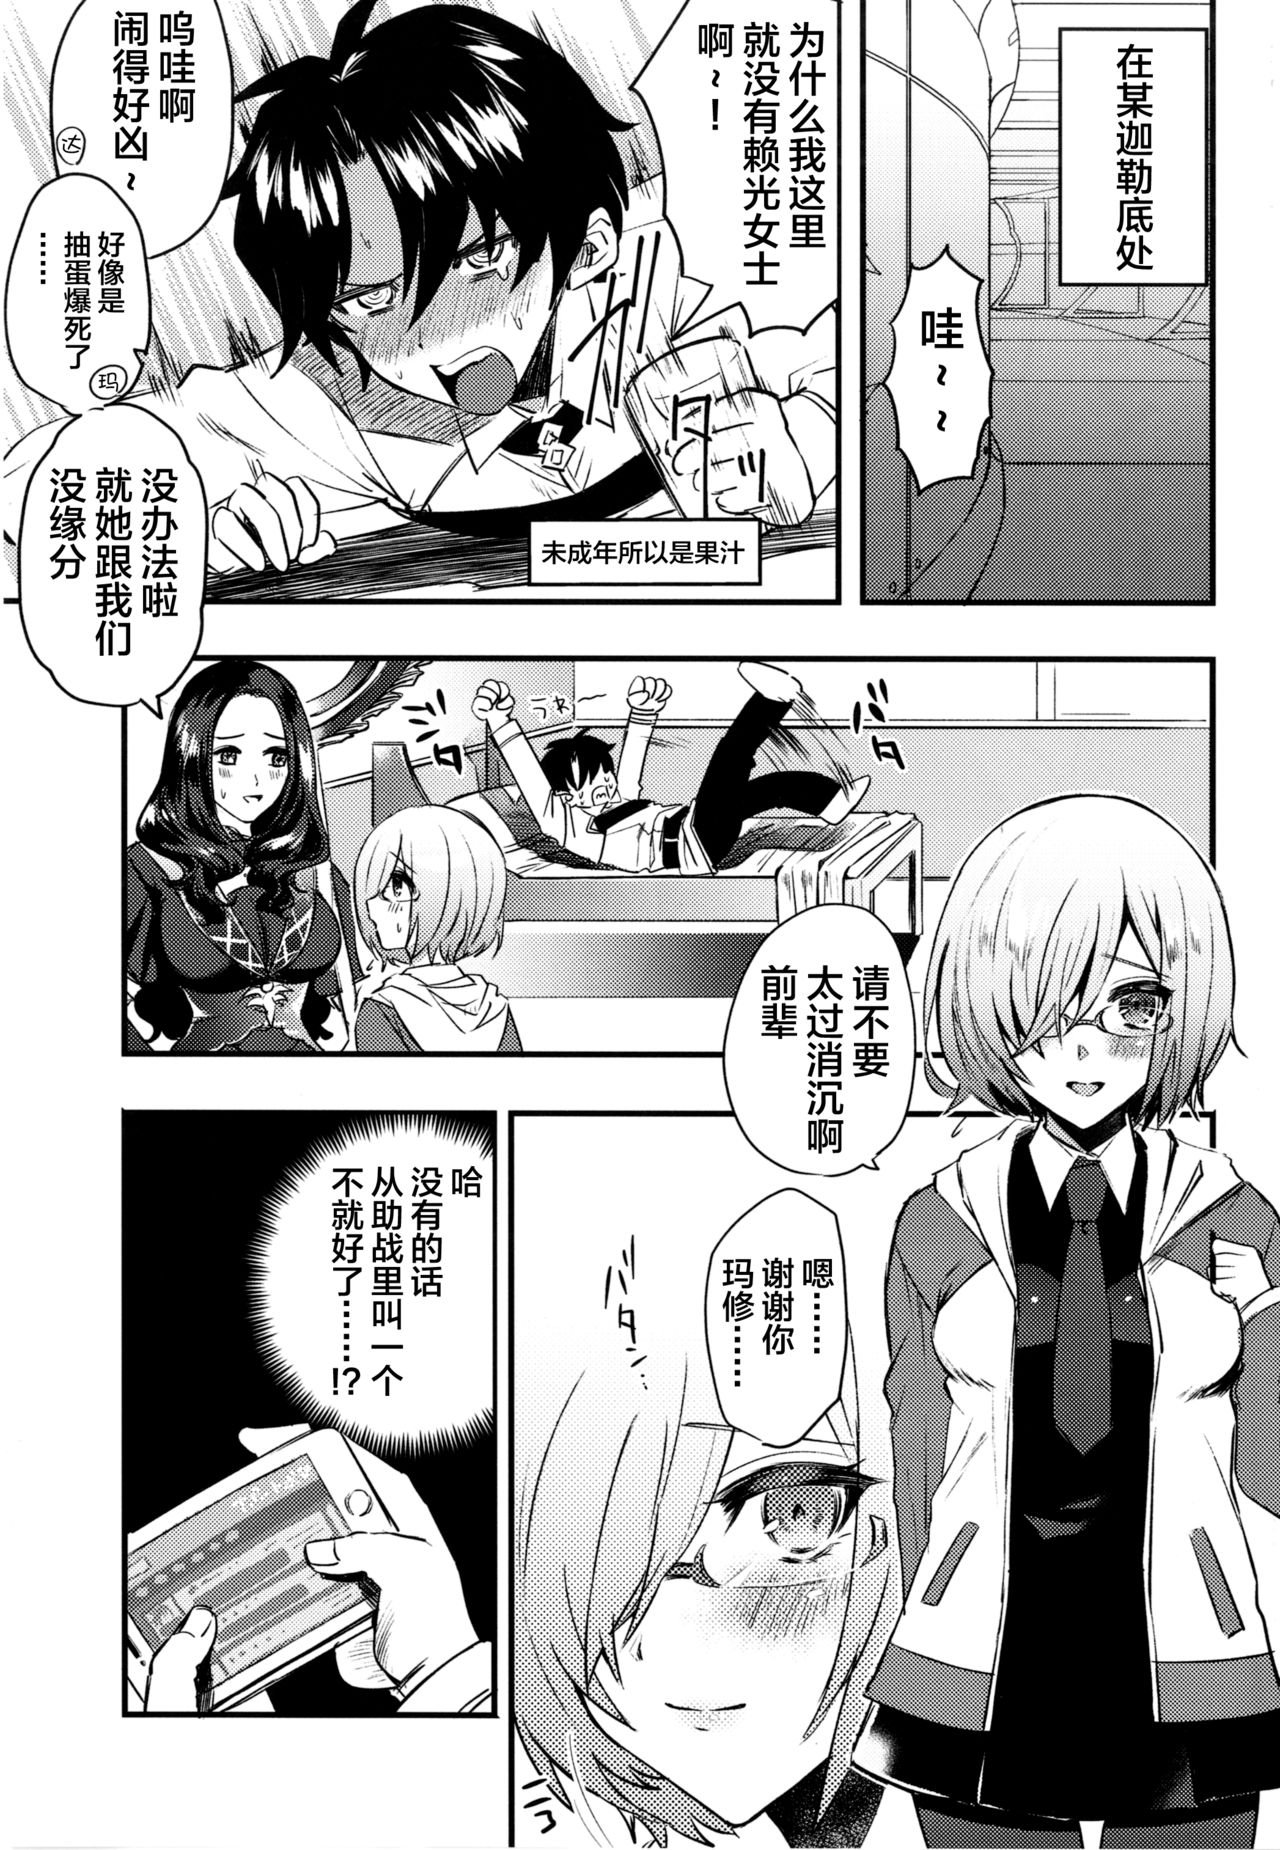 [Chimple Hotters (Chimple Hotter)] +SAPPORT no Raikou Mama to NTR Ecchi (Fate/Grand Order) [Chinese] [黎欧x新桥月白日语社] [Digital] page 5 full